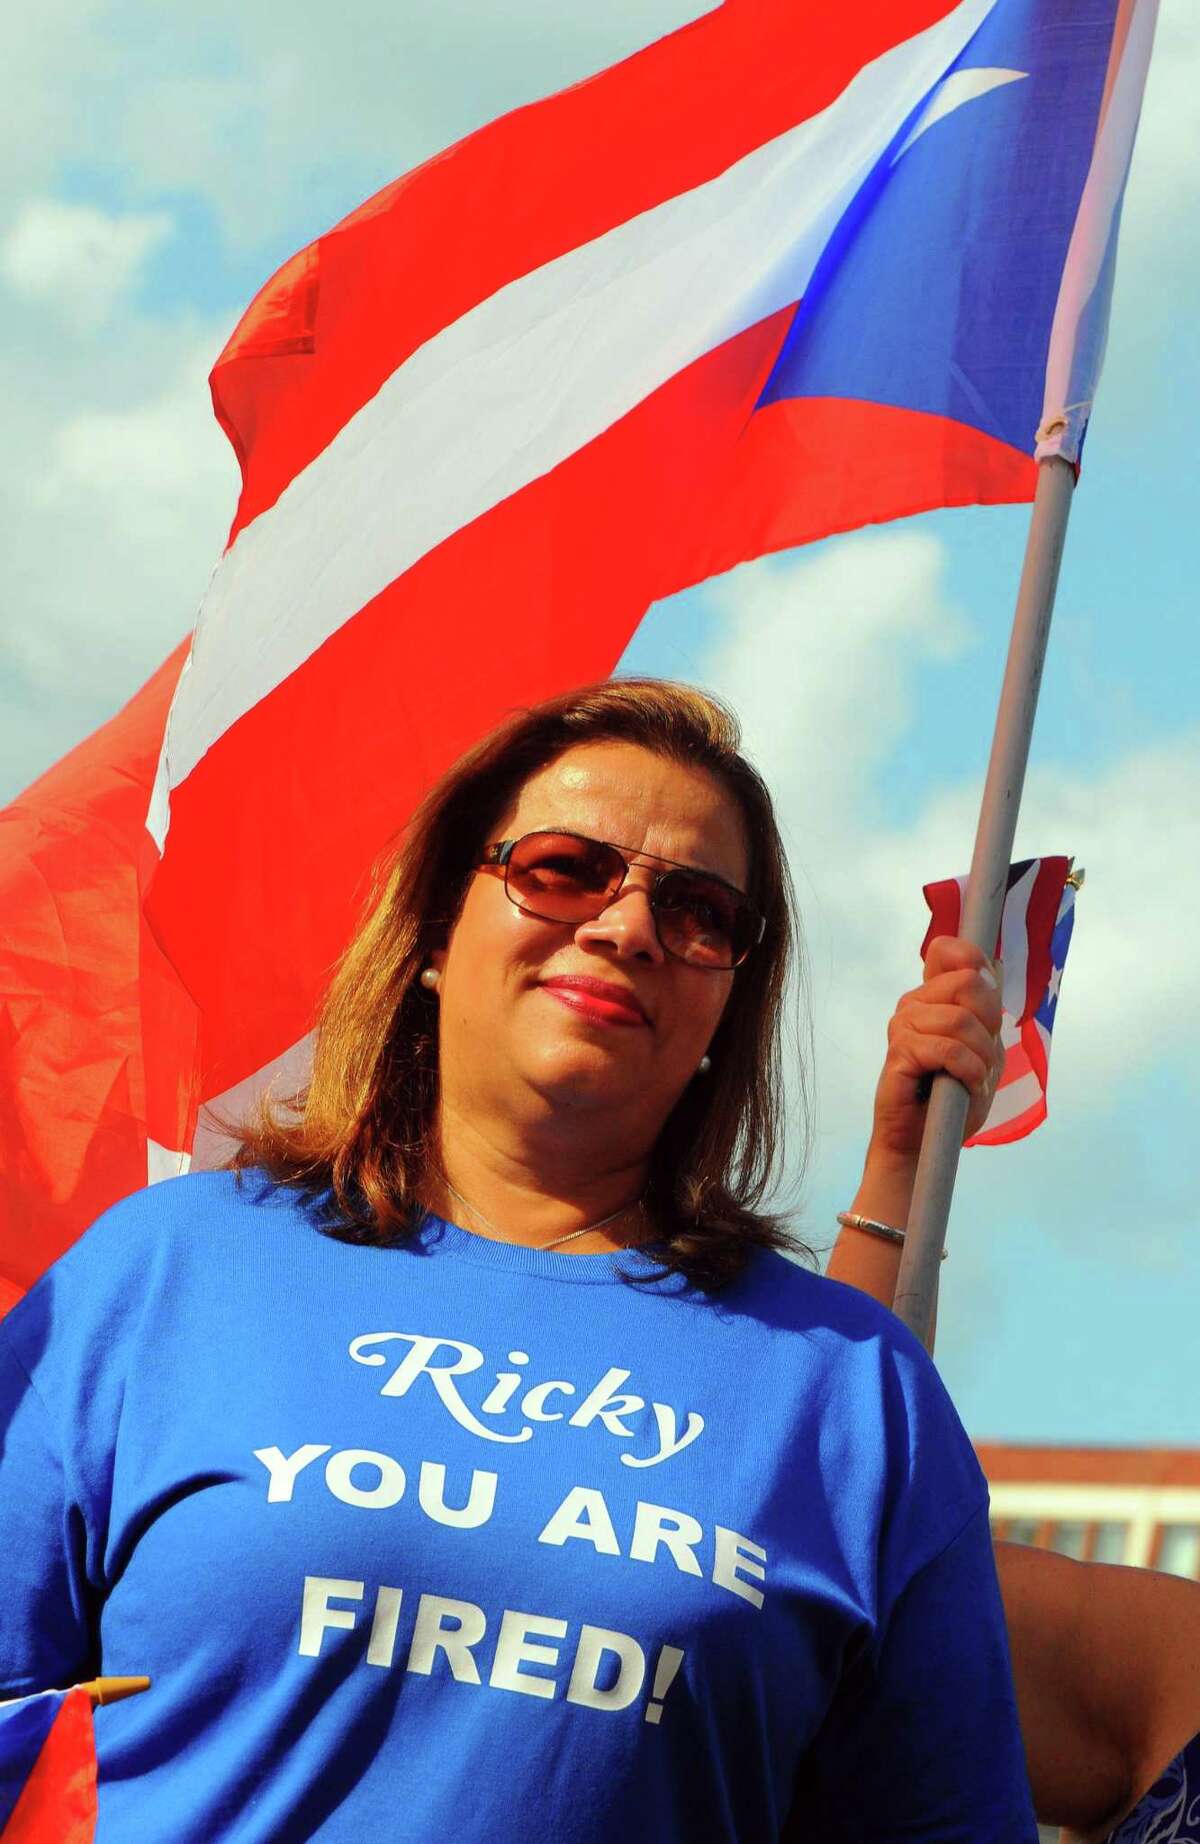 Lissette Colon, who works for the city of Bridgeport, wears a t-shirt celebrating the resignation of the Puerto Rican Governor Ricardo Rosselló during a rally at Baldwin Plaza in downtown Bridgeport, Conn., on Thursday July 25, 2019. The rally was held in solidarity with the people in San Juan, Puerto Rico who protested, leading to the resignation of Rosselló last night.